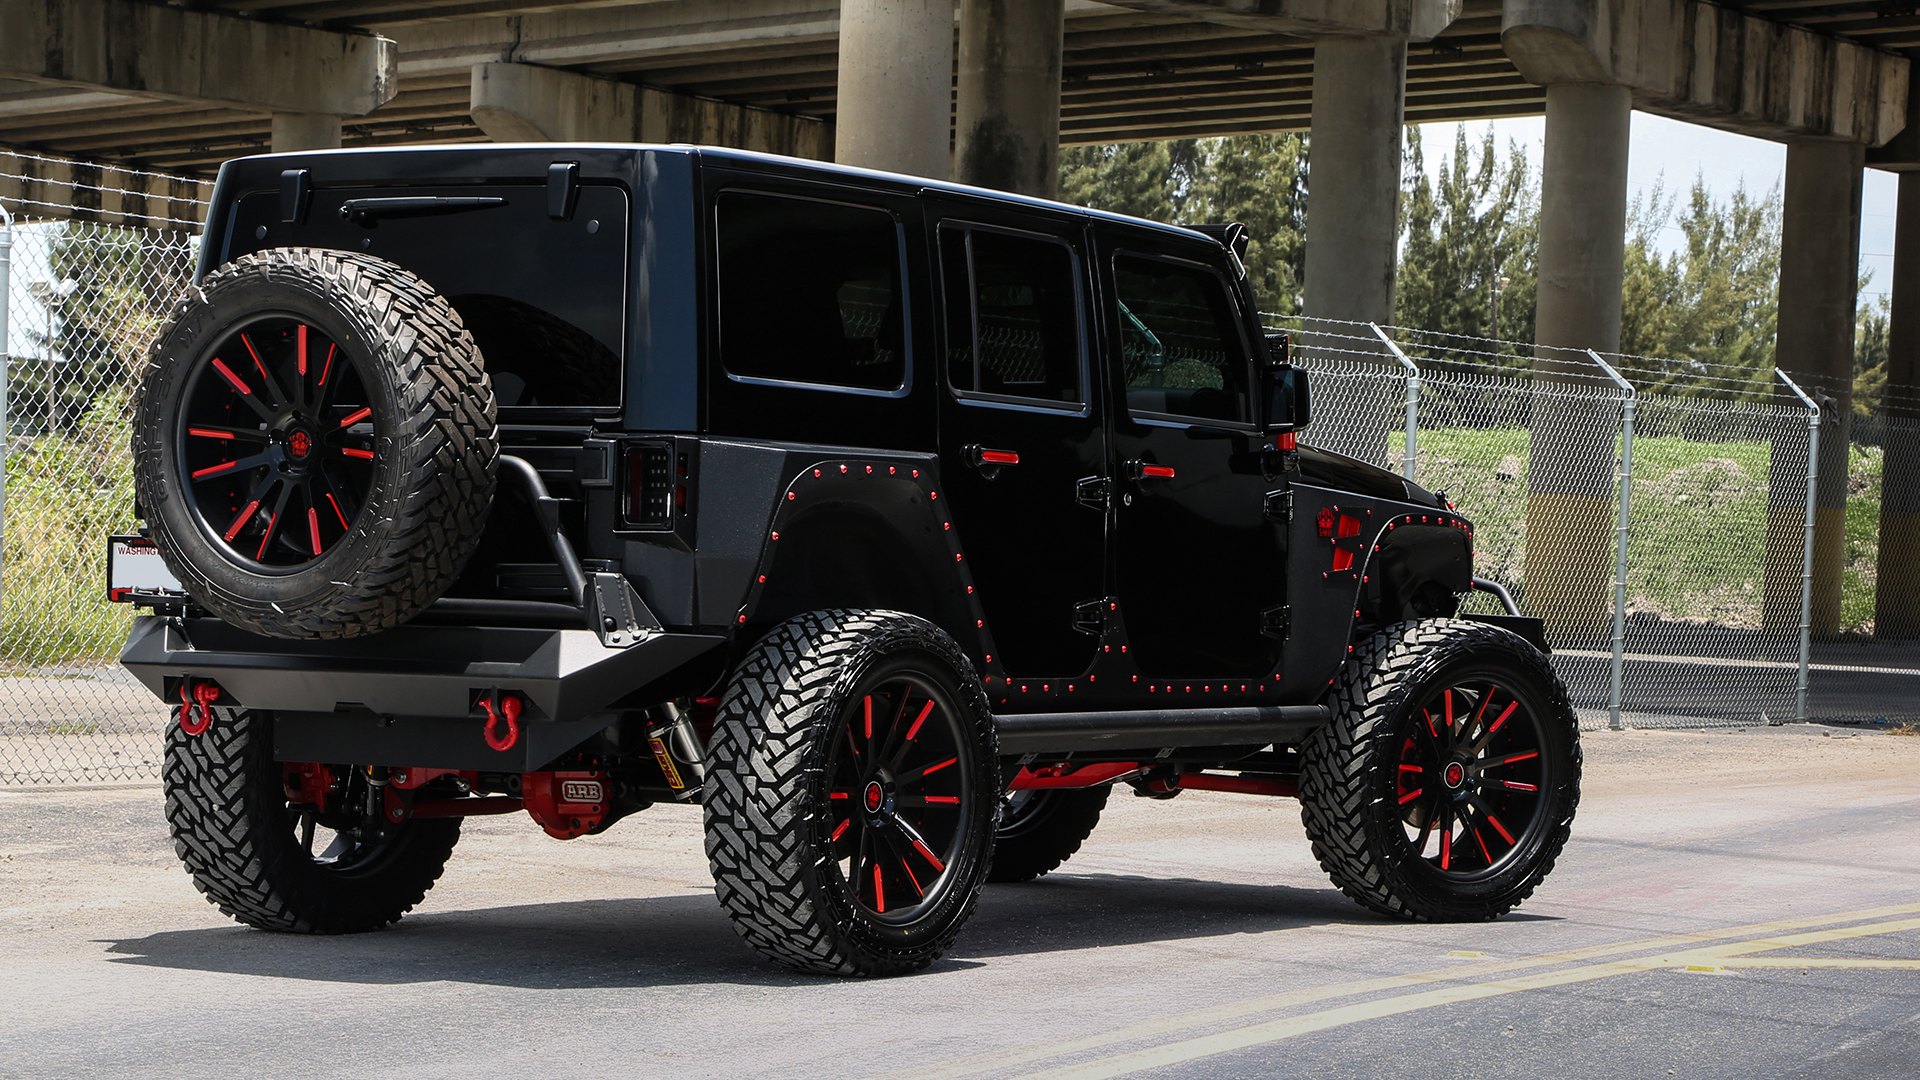 Black Jeep Wrangler With White Accents Clearance, SAVE 51% 